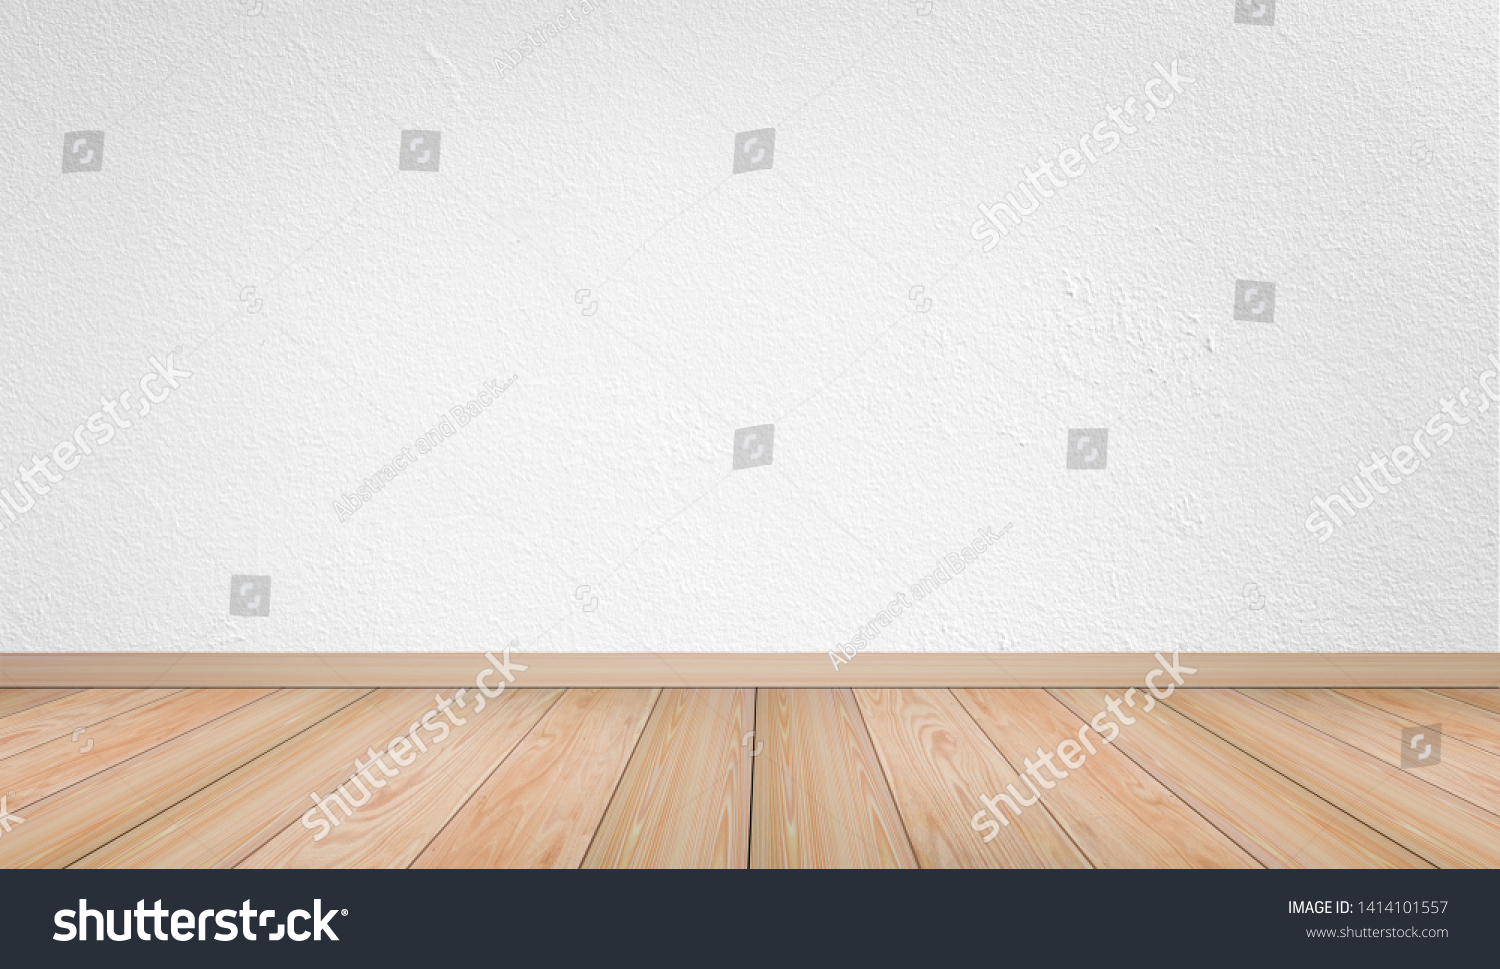 Empty room with white cement wall texture and brown wooden floor pattern. Concept interior vintage style #1414101557